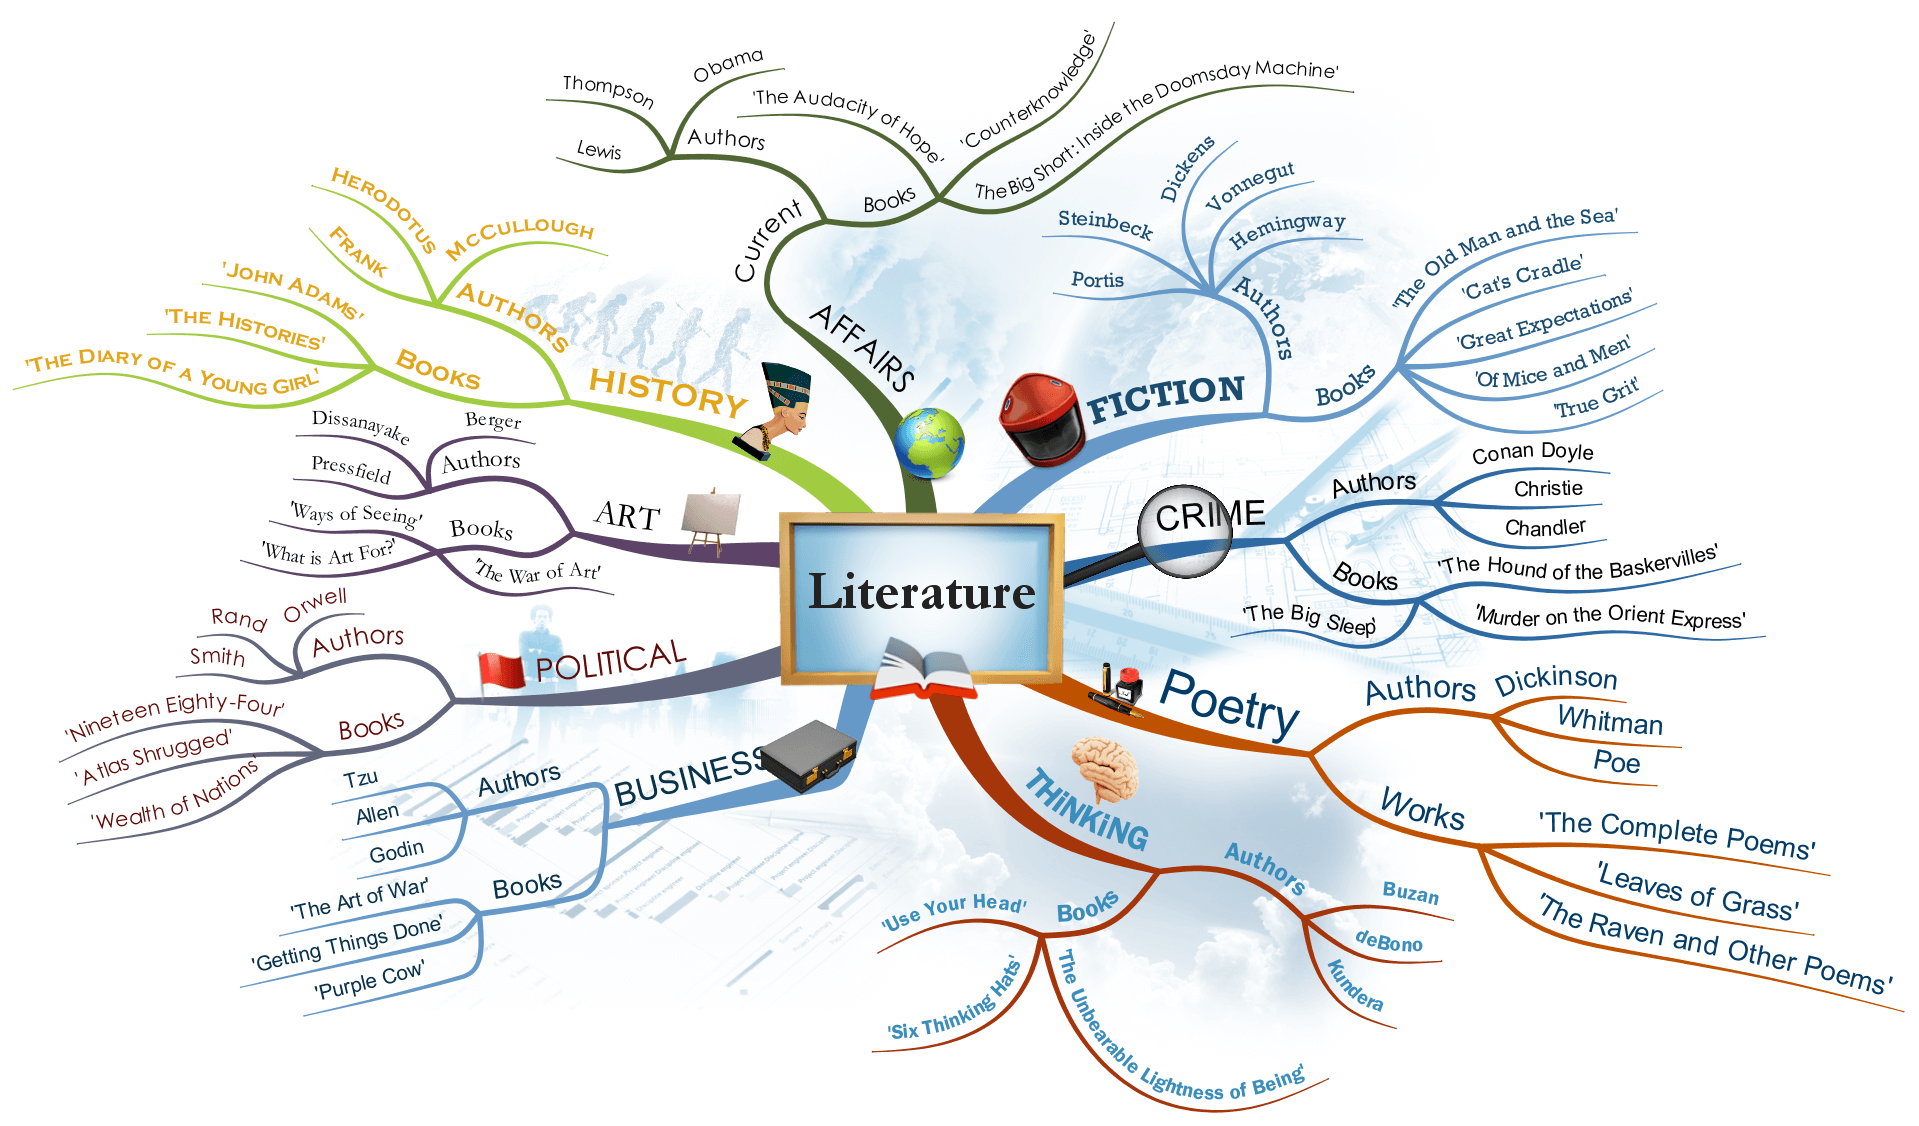 five-best-mind-mapping-tools-mind-map-mind-mapping-tools-best-mind-map